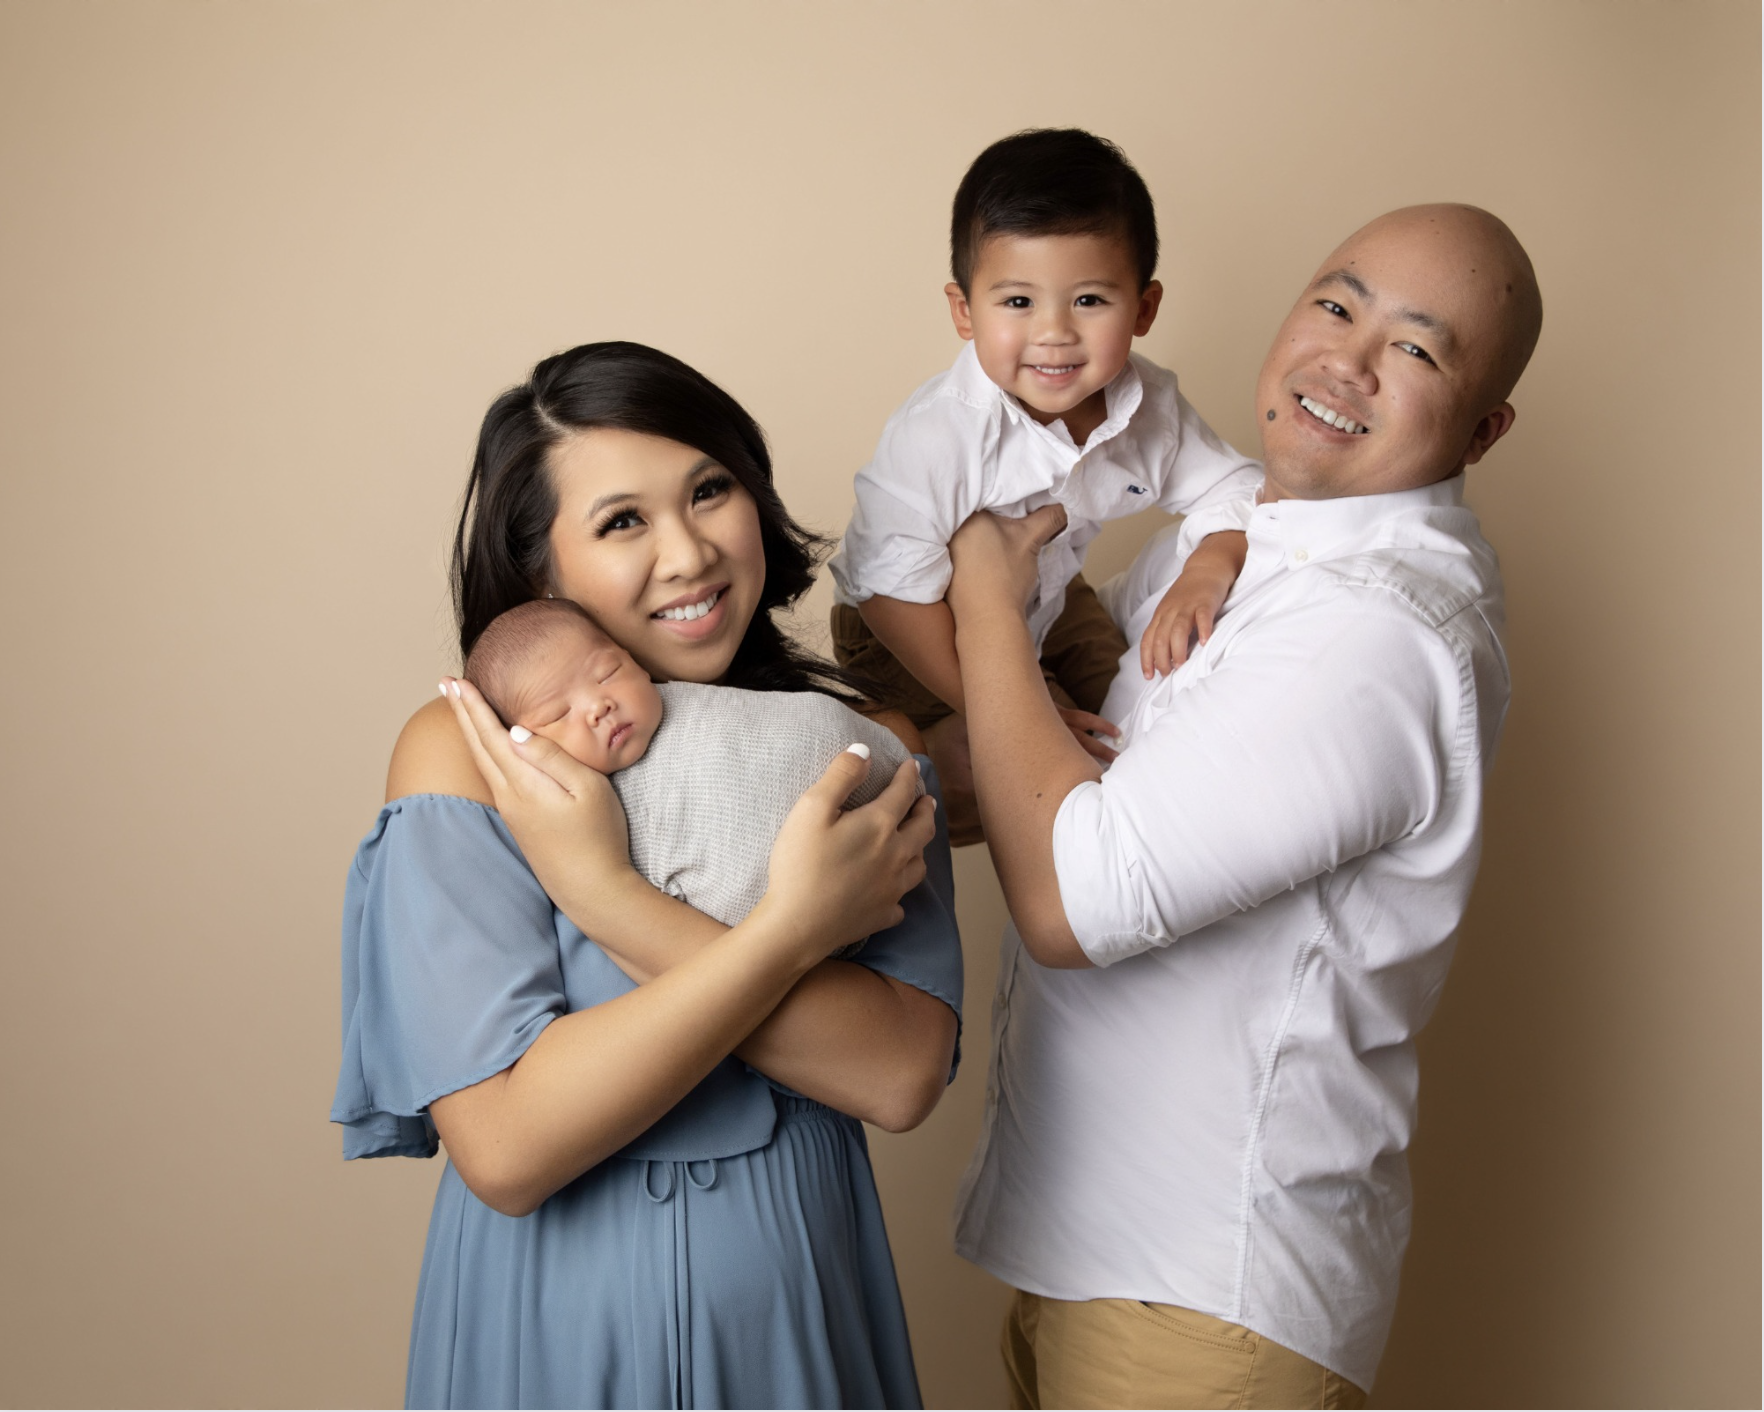 A family portrait done by Candice Swanson Photography Best Family Photography Studio